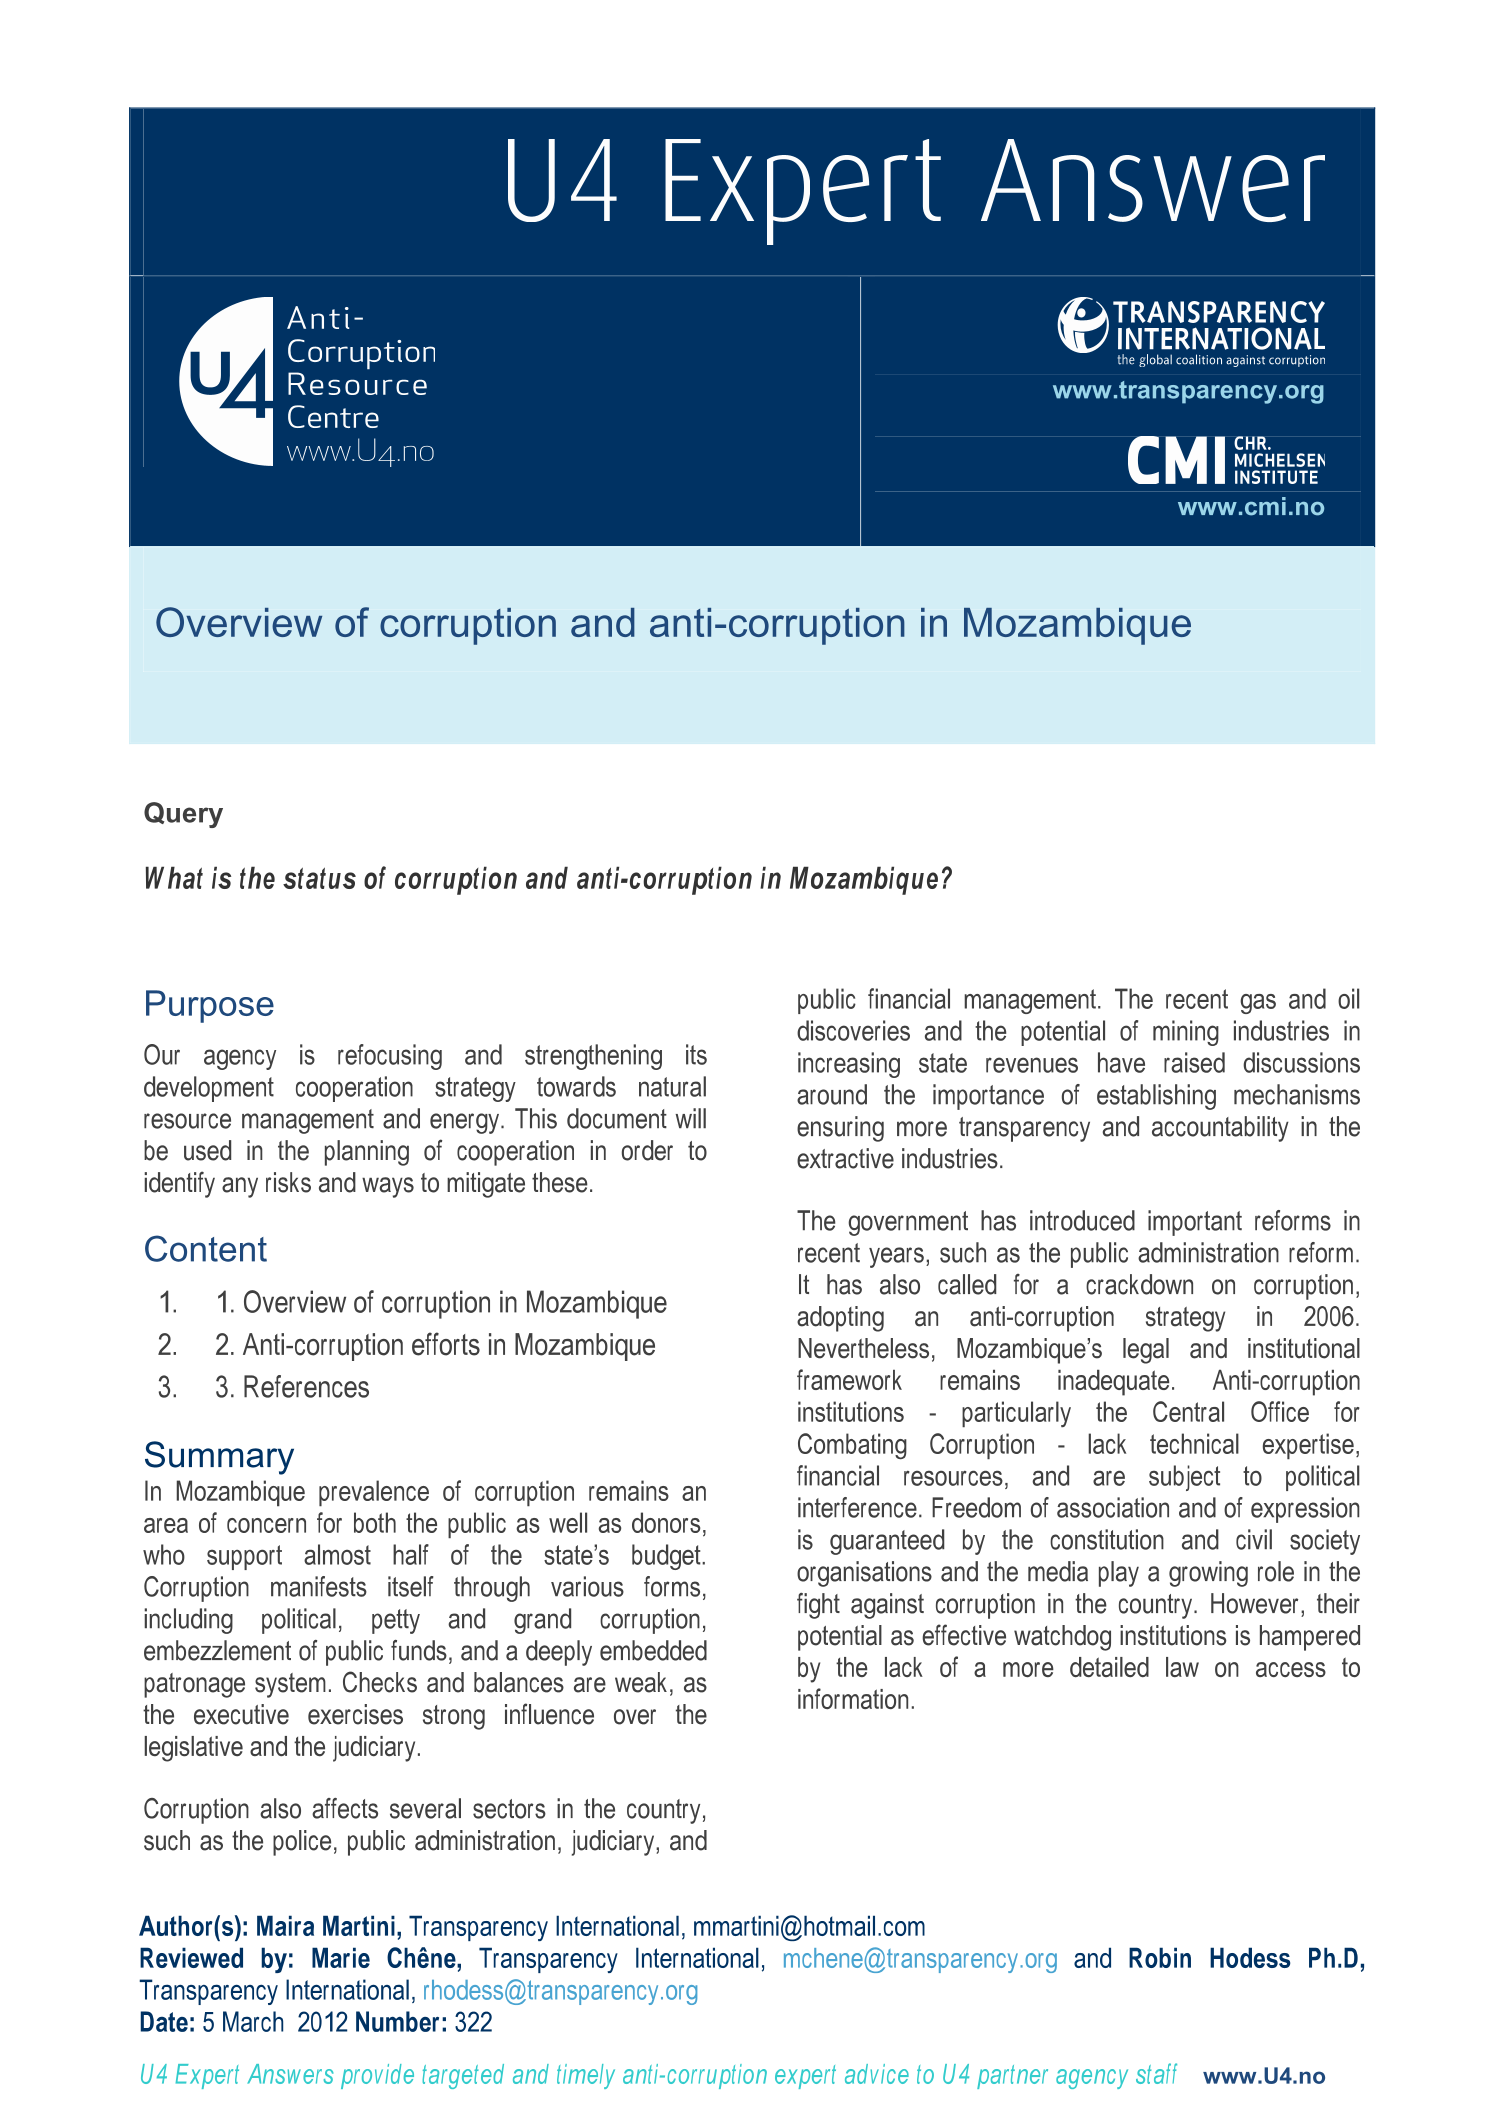 Overview of corruption and anti-corruption in Mozambique